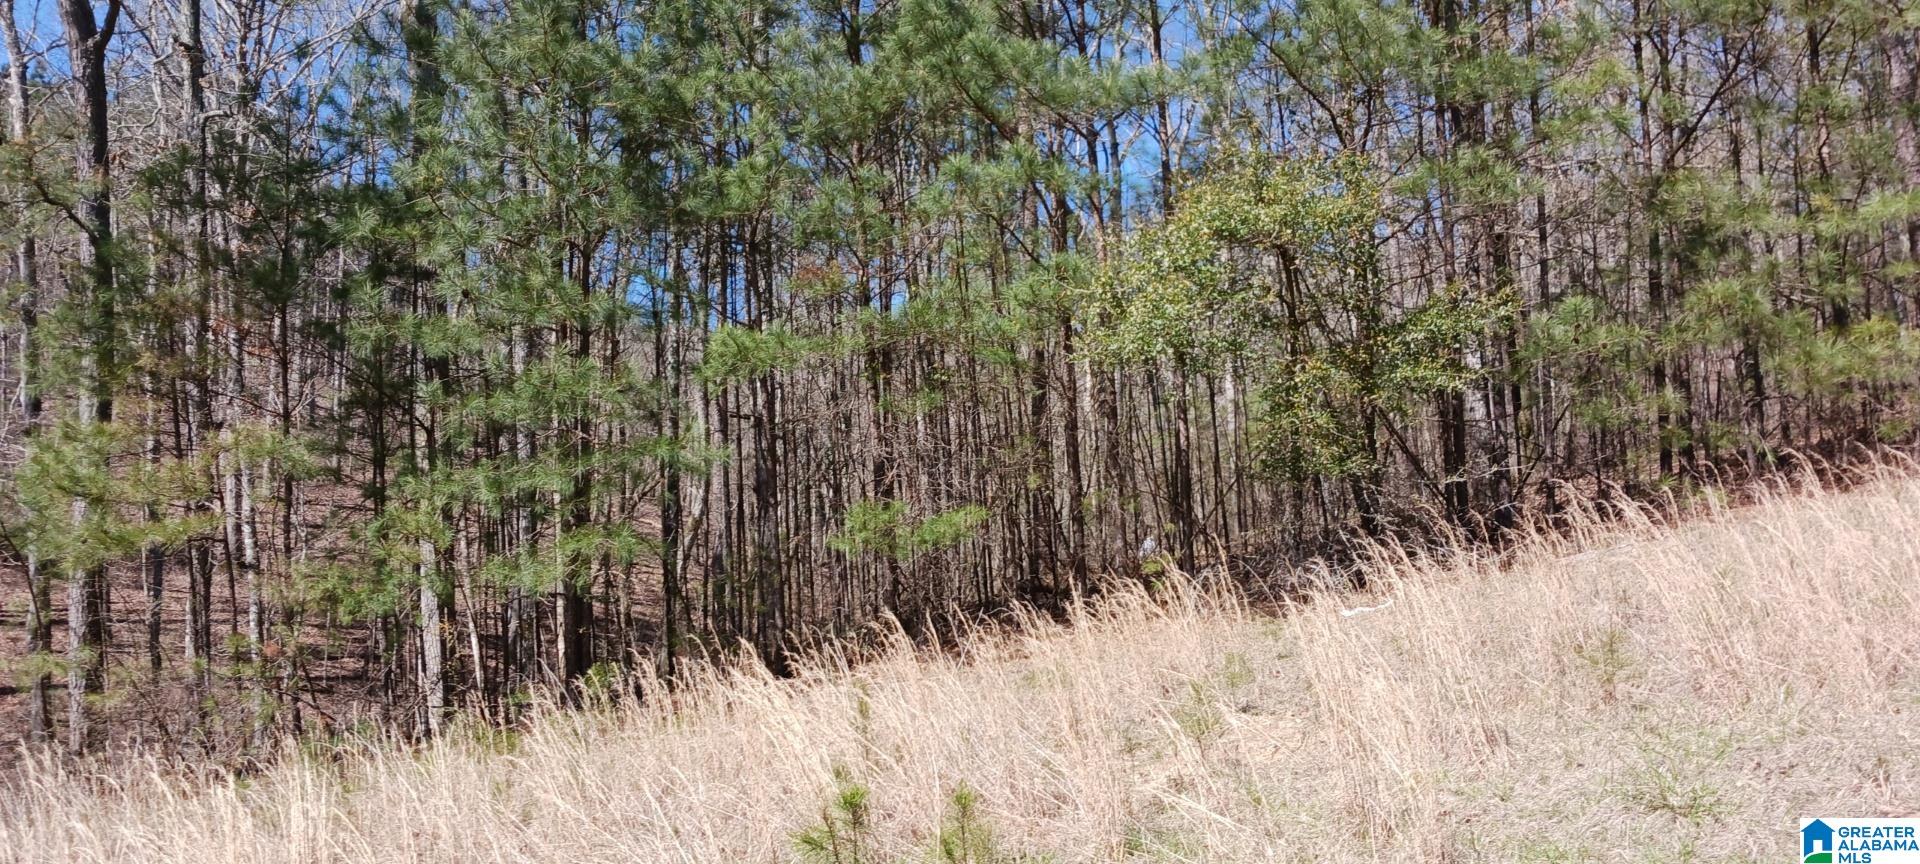 Lot 223 STONEY POINT ROAD S 223, DOUBLE SPRINGS, AL 35553